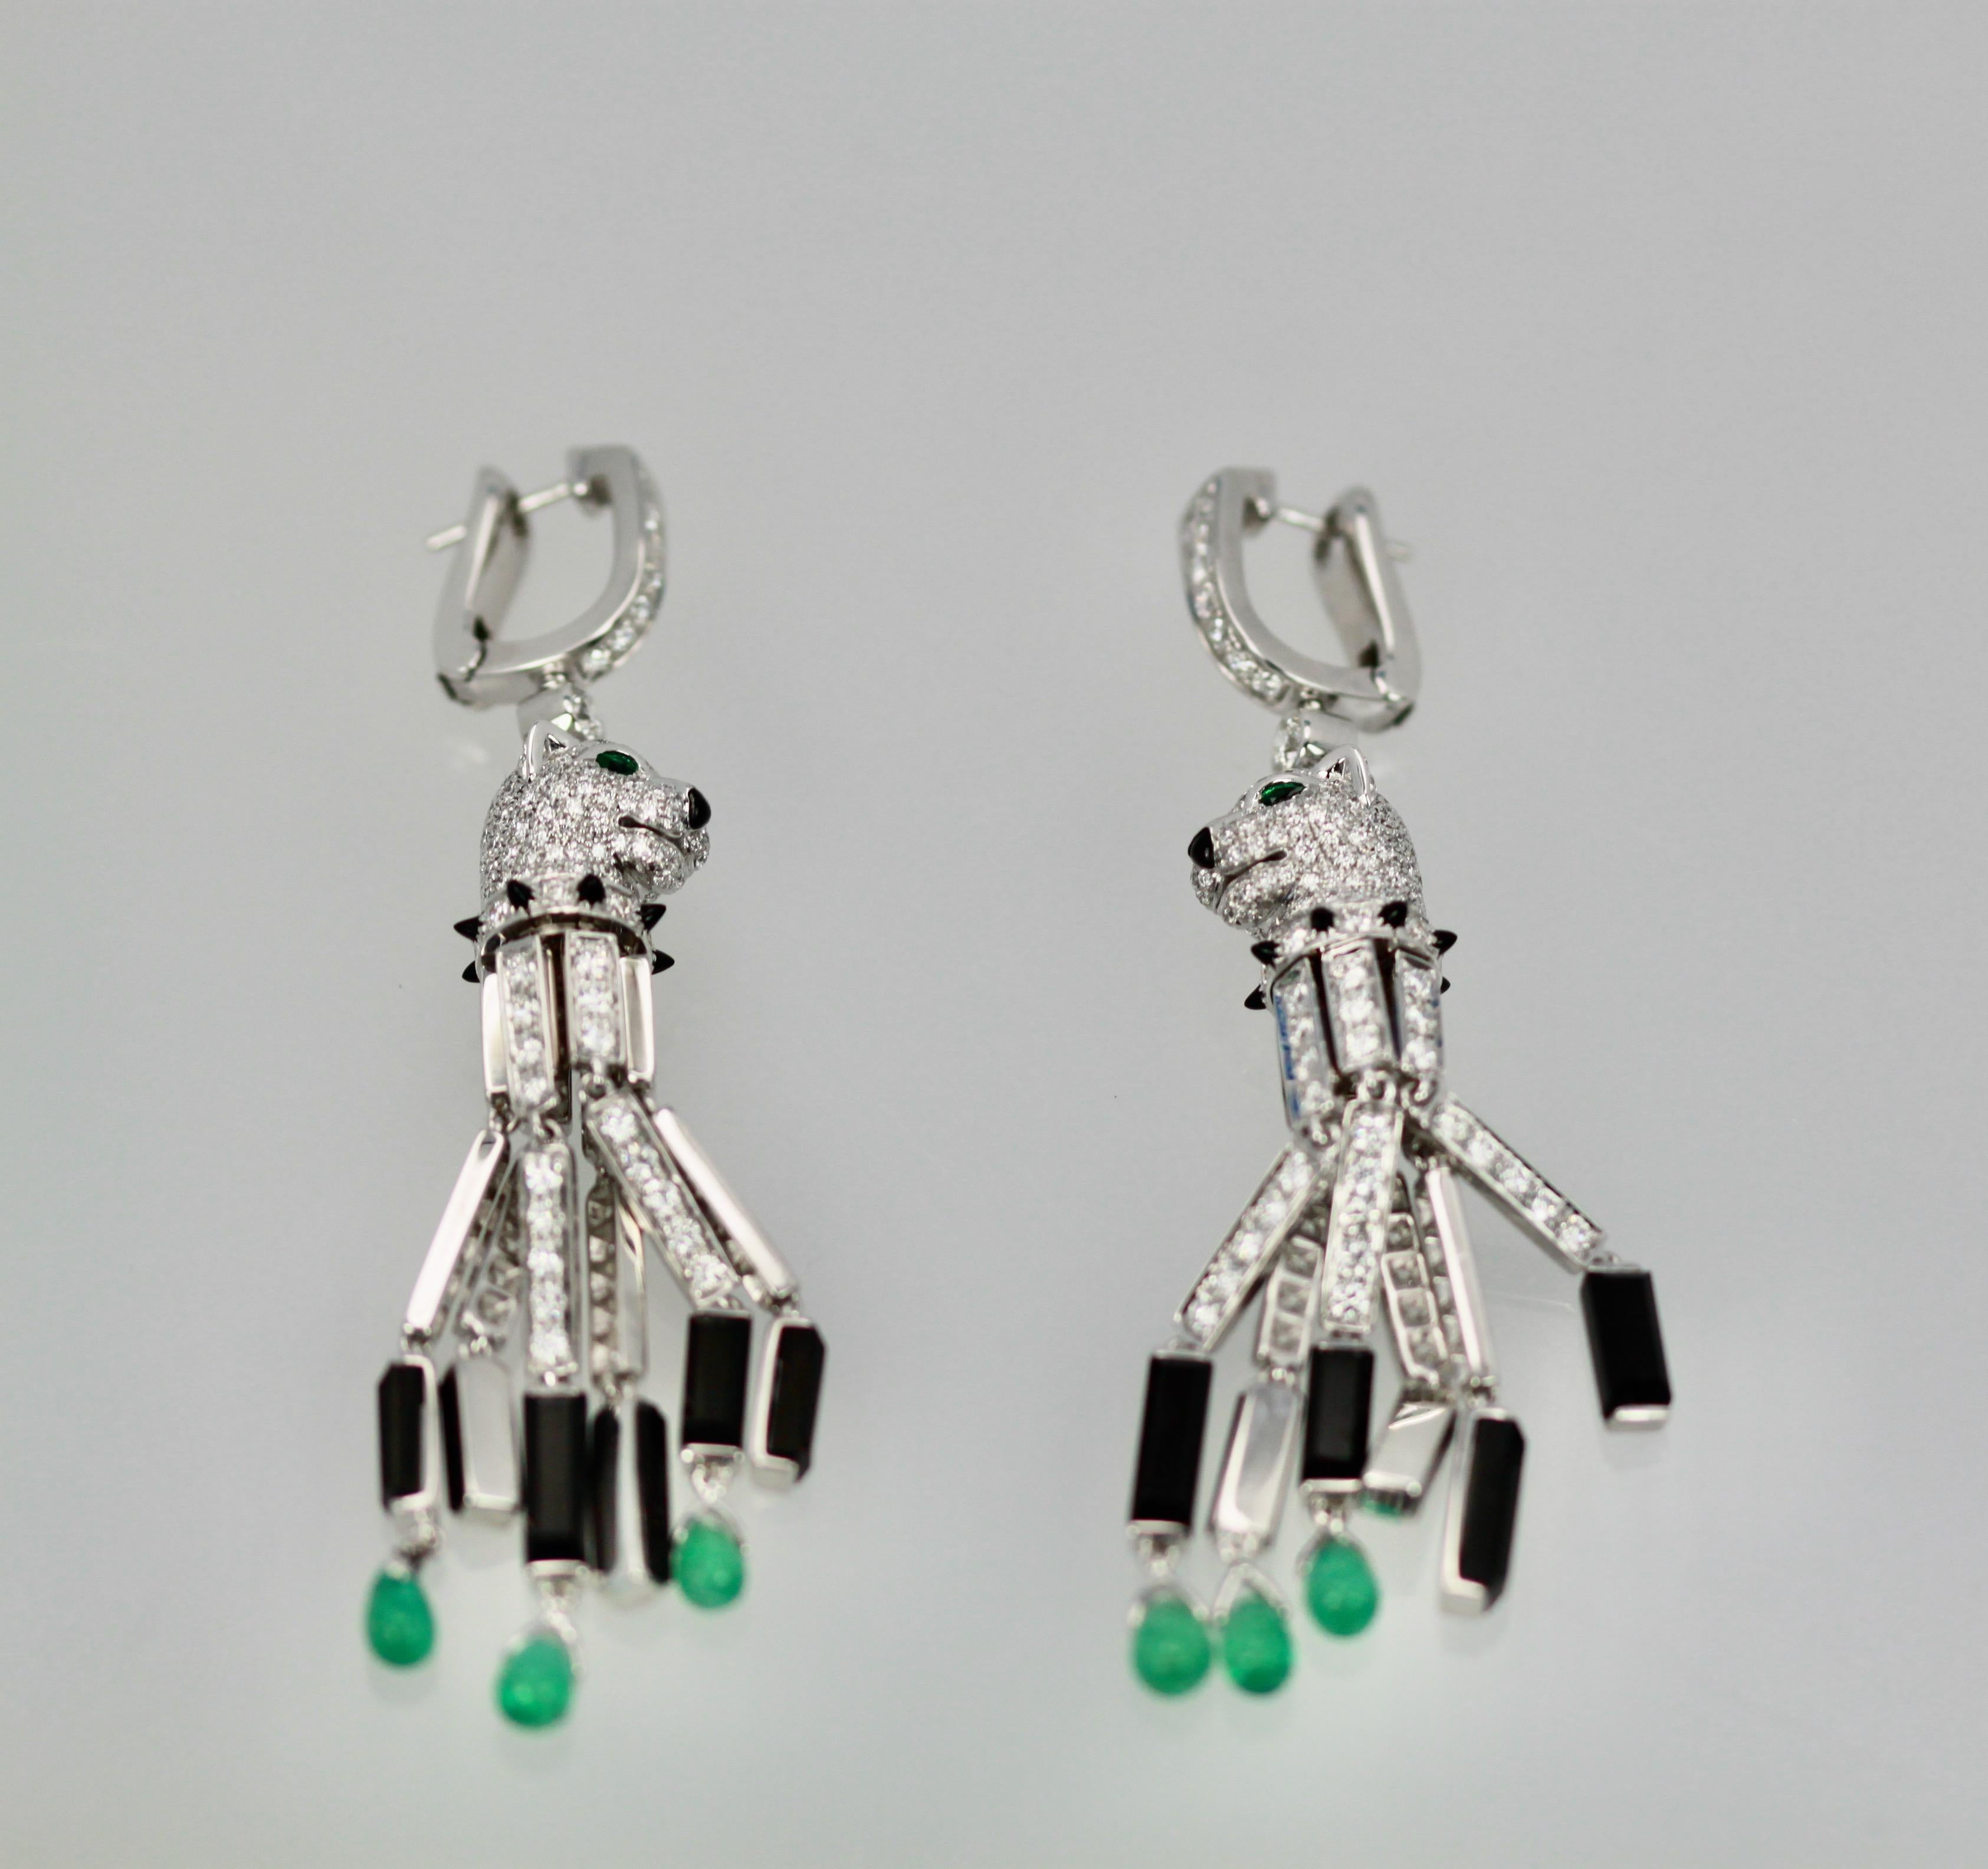 These Cartier Diamond Panthere Tassel Earrings are splendid and unusual as they sell for $153,000.  They consist of 10 Emeralds, 444 Diamonds E-F, VS Onyx plaques and Onyx studded collar.  There are 5.95 Carats of Diamonds.  You will not see these